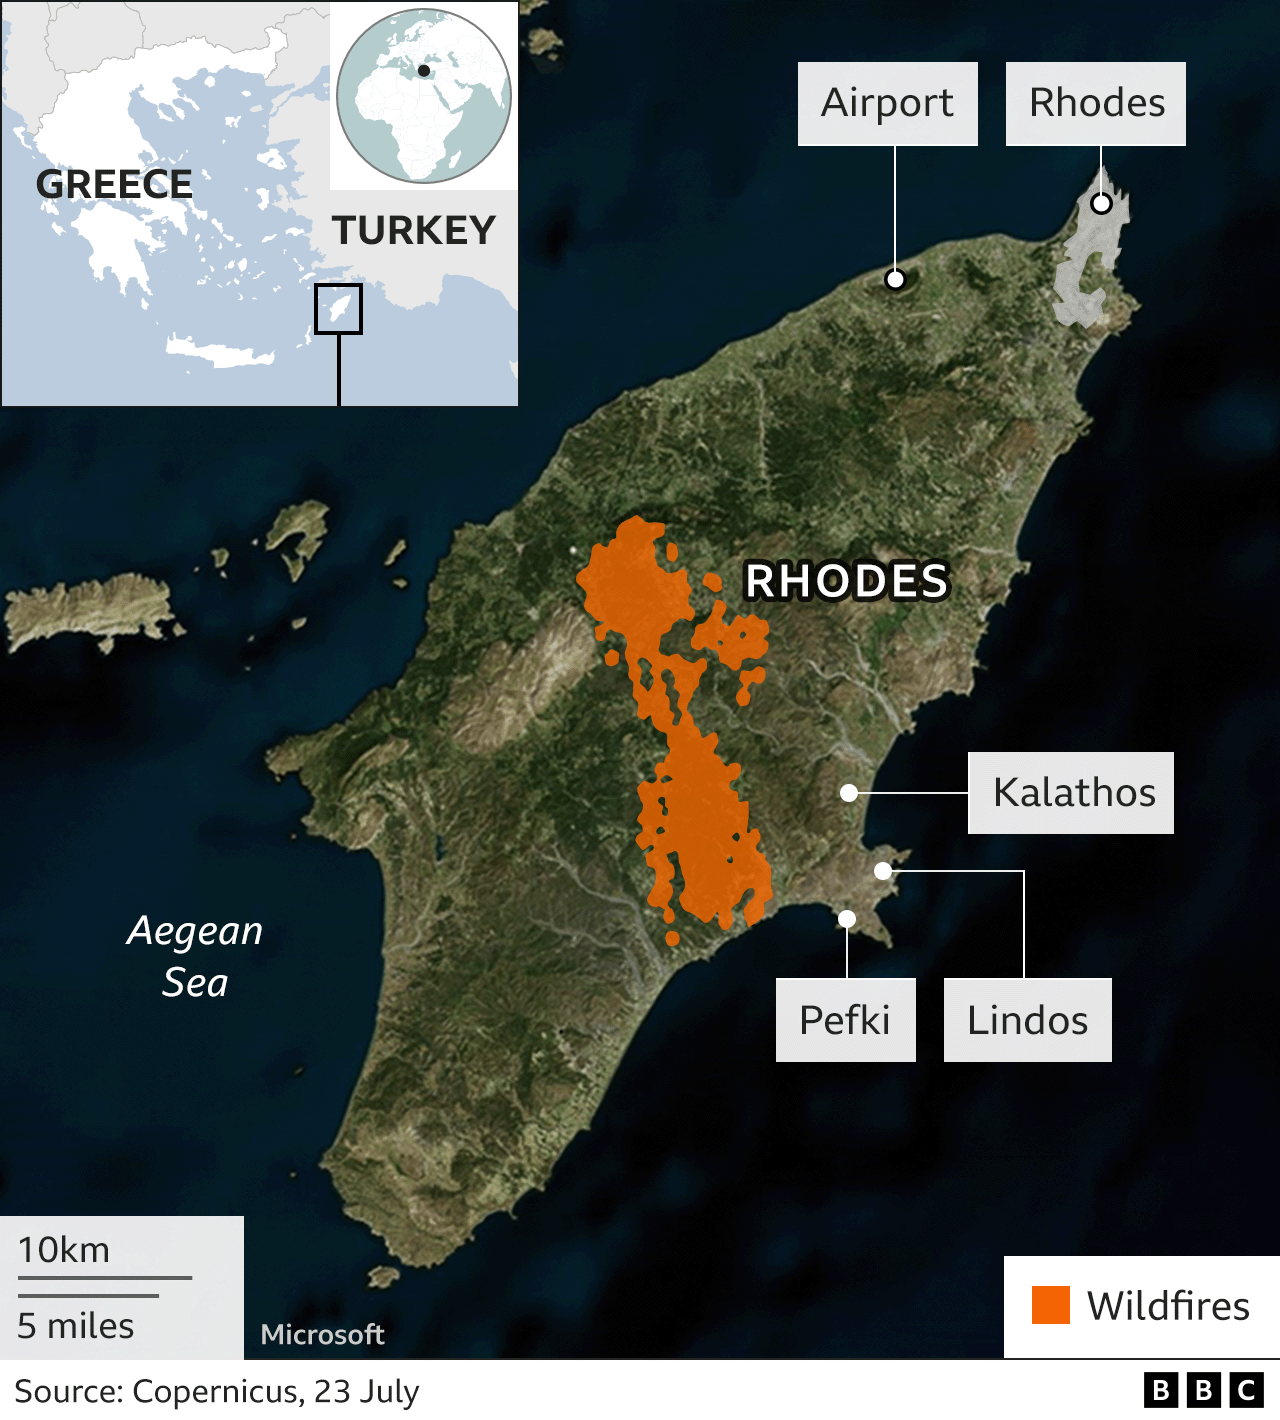 A further 1,200 will be evacuated from three villages - Pefki, Lindos and Kalathos.